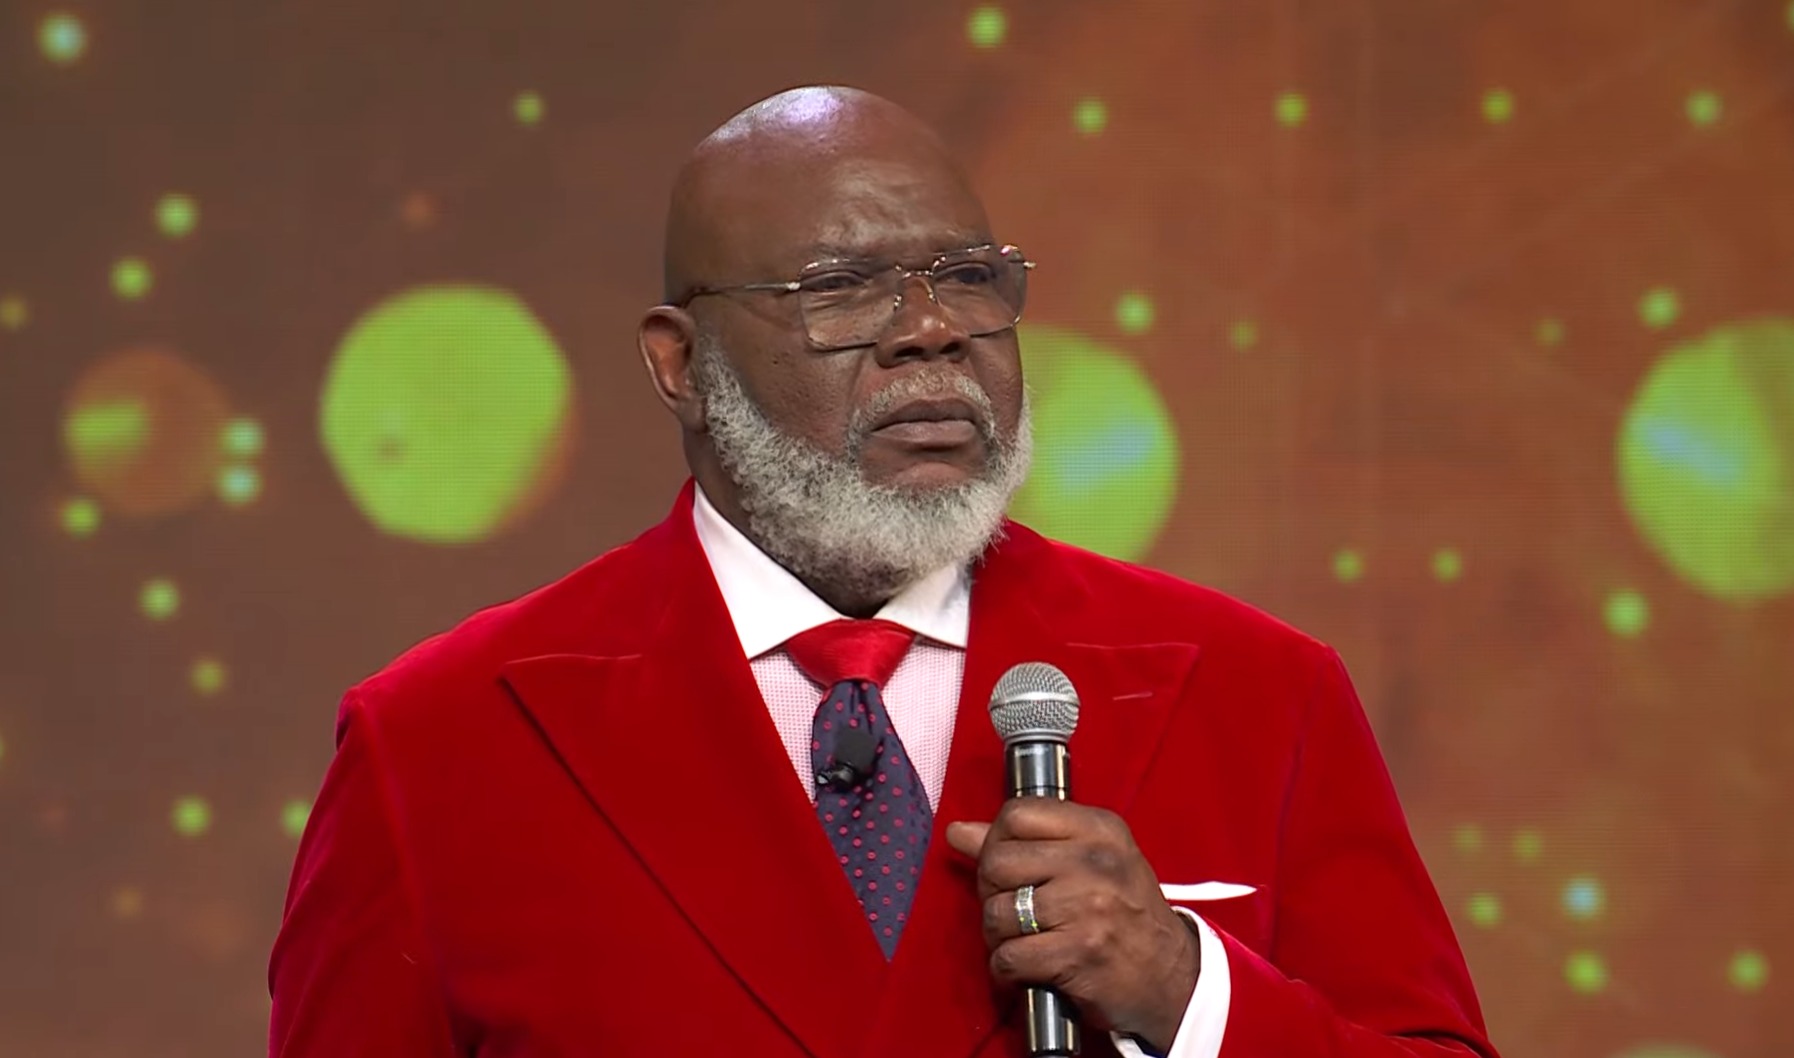 WATCH | Bishop T.D. Jakes denies getting lit at Diddy’s sex parties